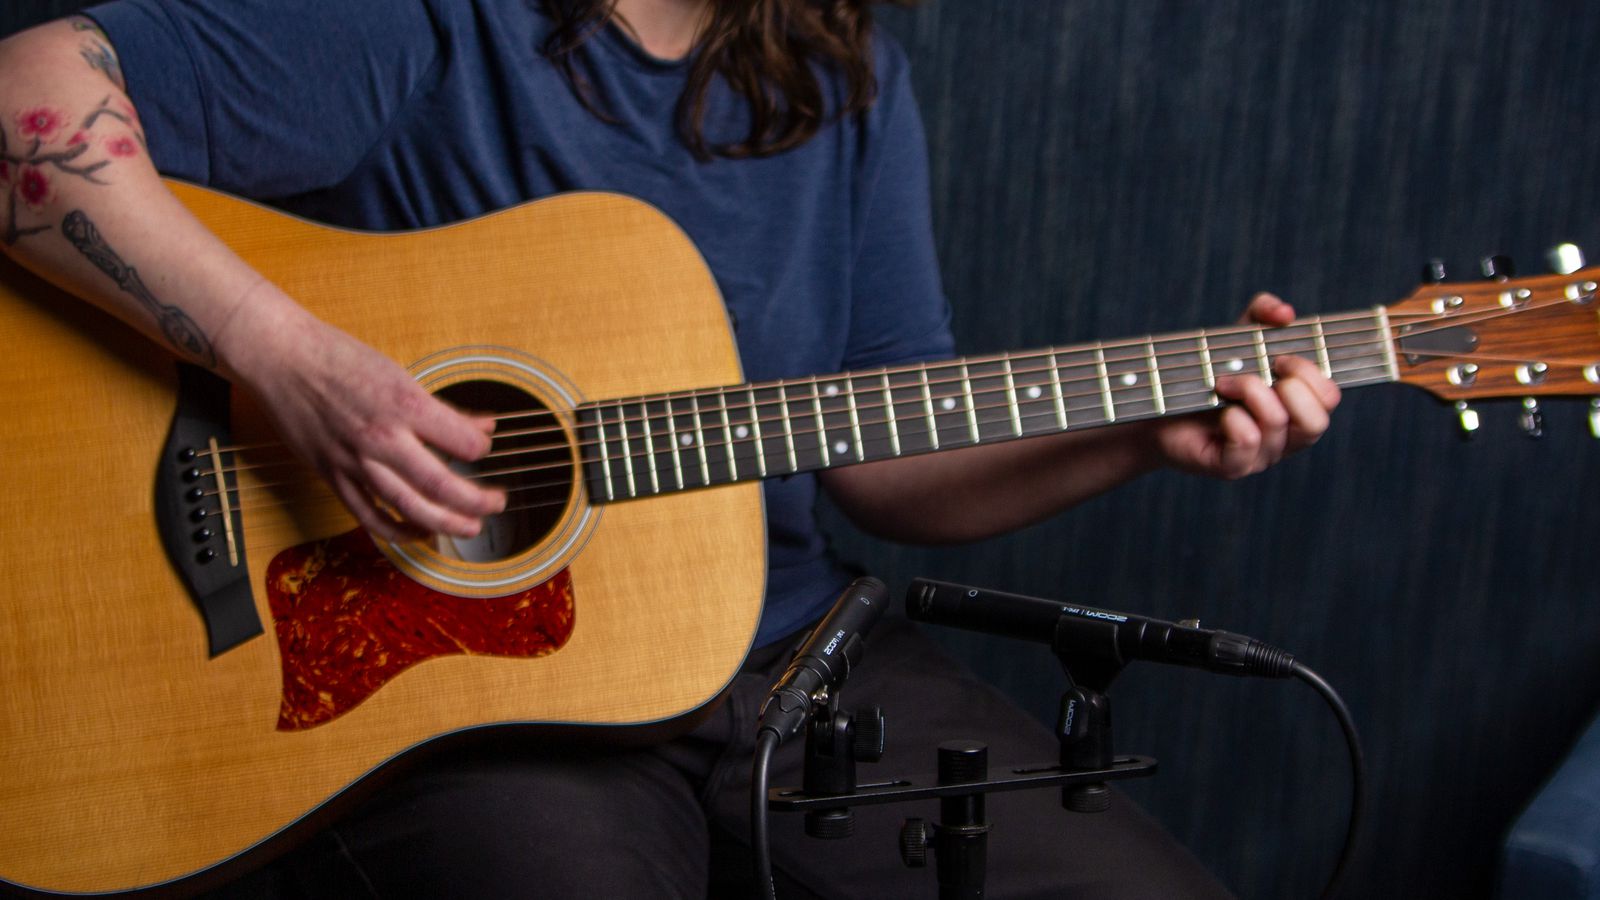 Musician playing an acoustic guitar with ZPC-1 mics used for recording